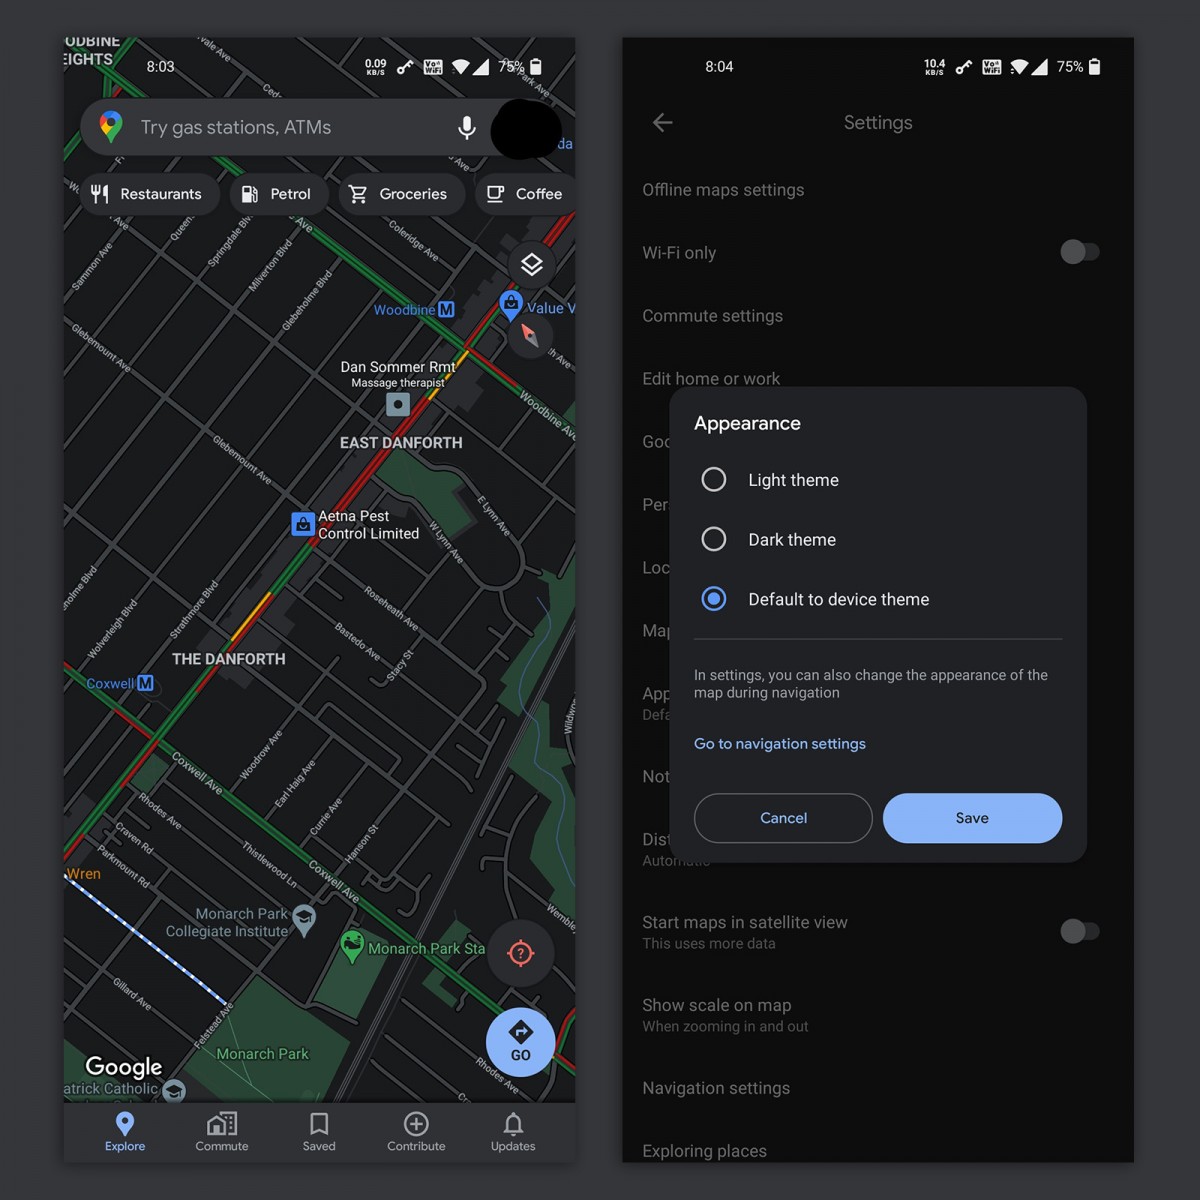 Google Maps on Android has a new Android Auto style driving UI